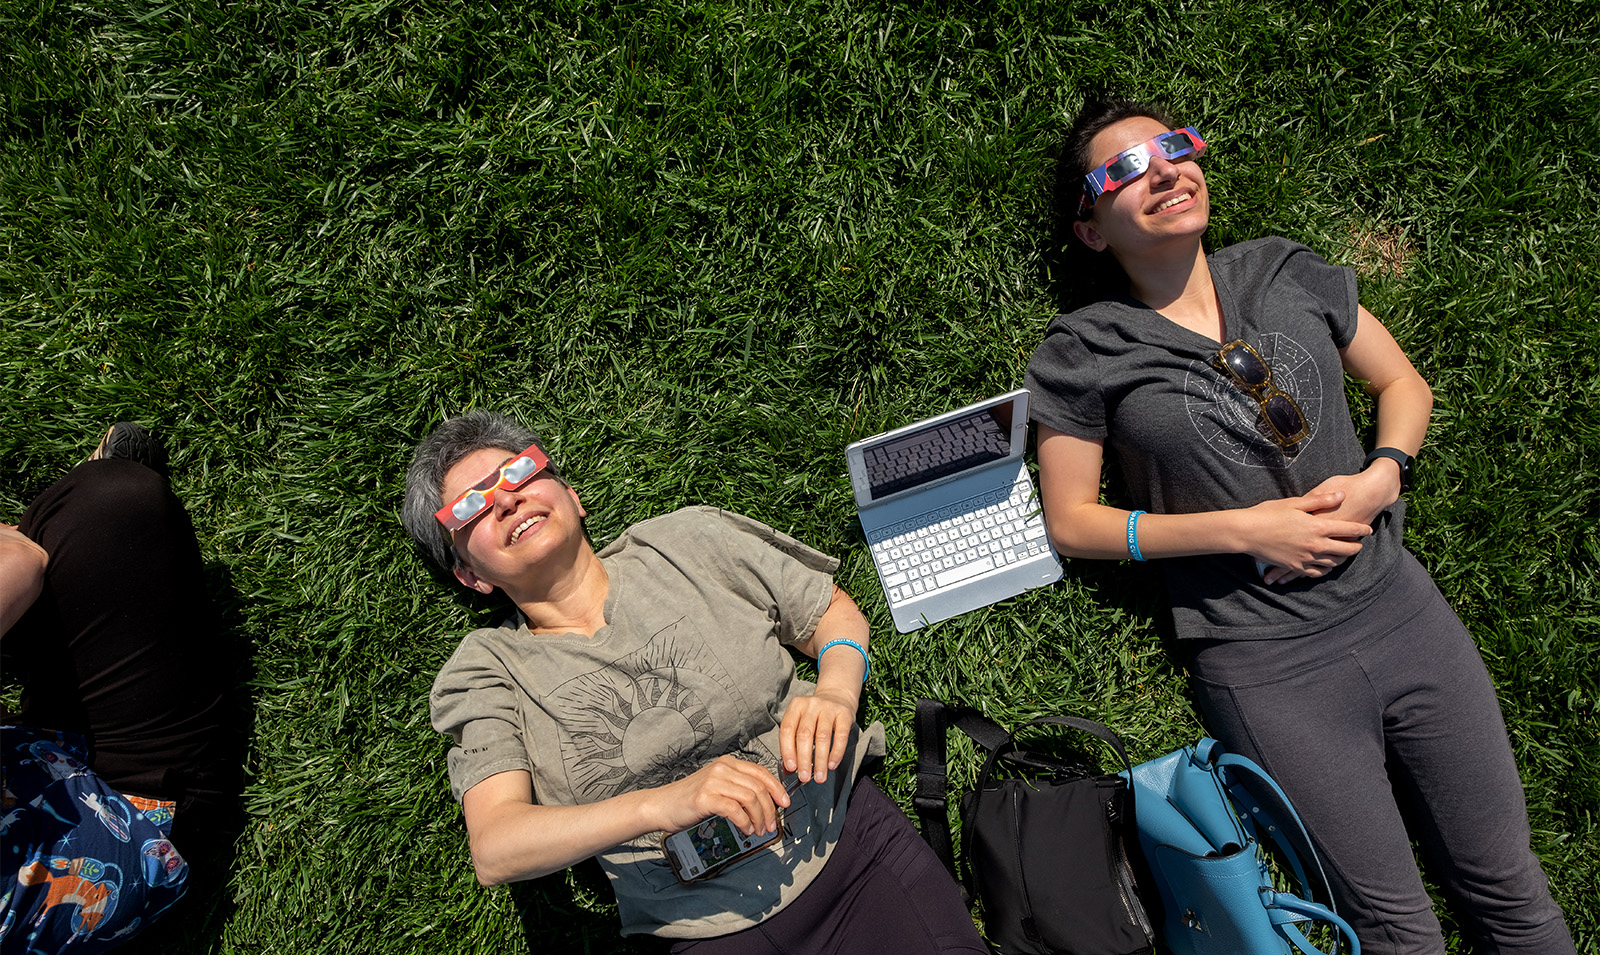 Two women, with a laptop between them, sitting on grass and looking up a soalr eclipse while wearing safety sunglasses.